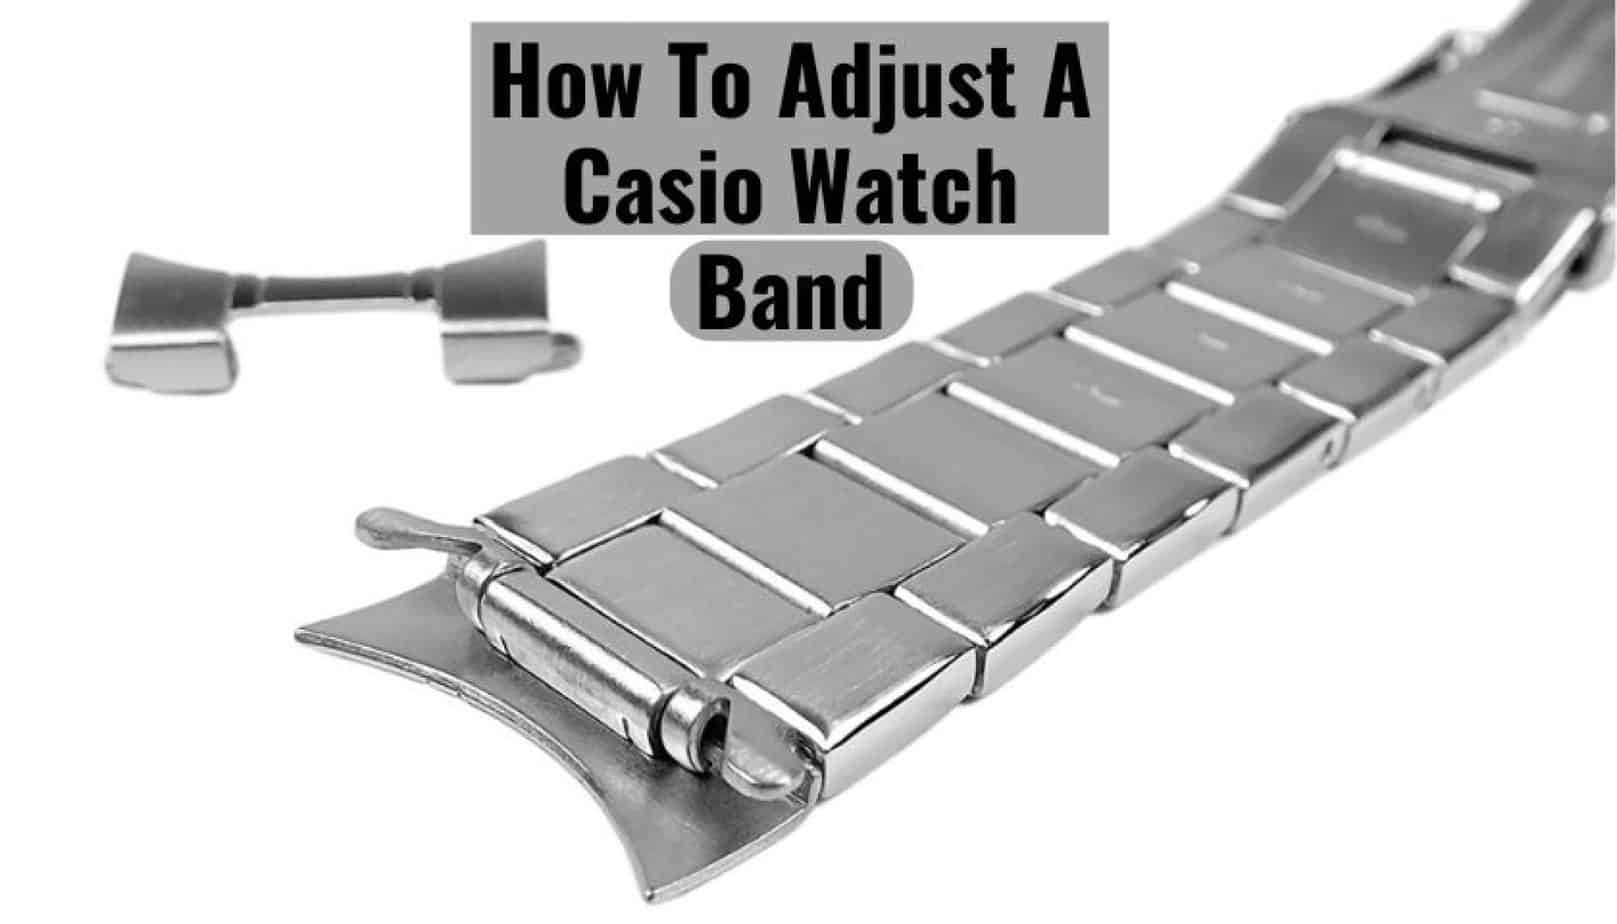 How To Adjust Casio Watch Band 2048x1170 